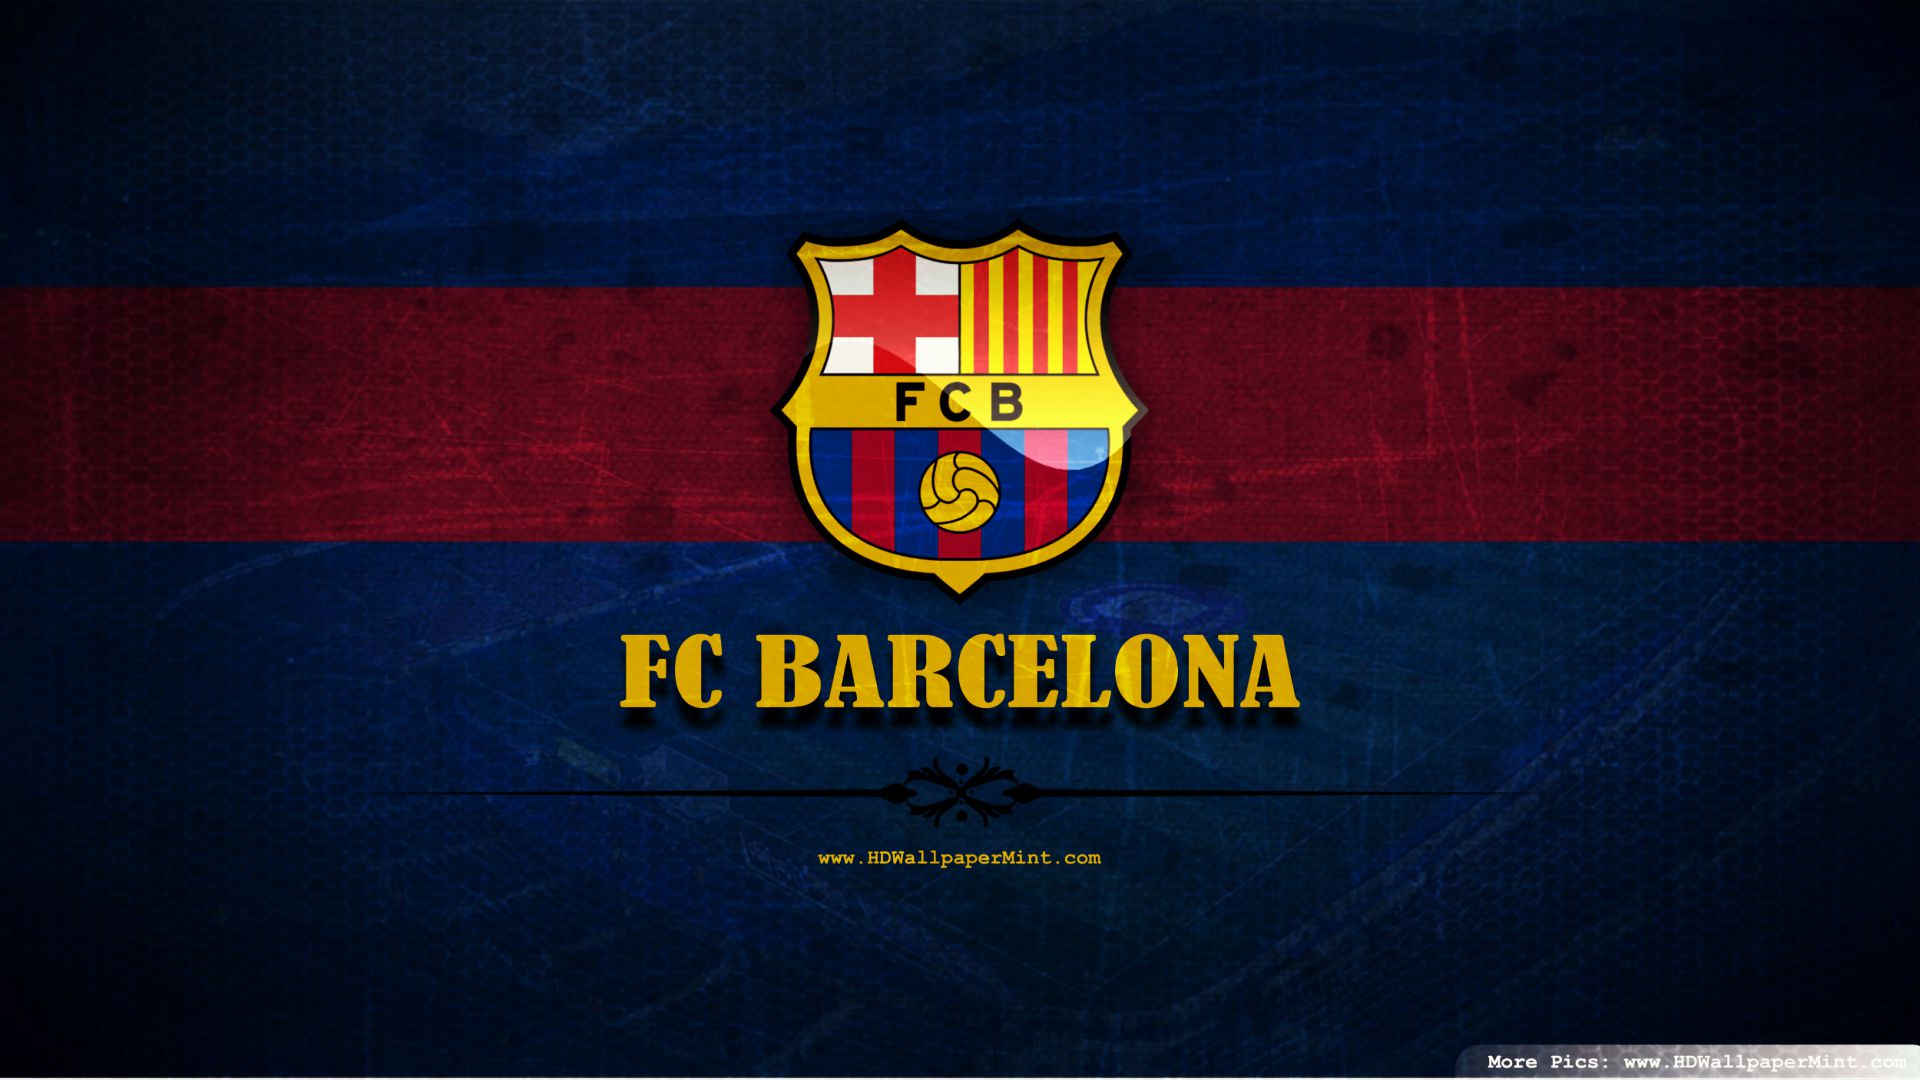 Wallpaper Hp Android Fc Barcelona